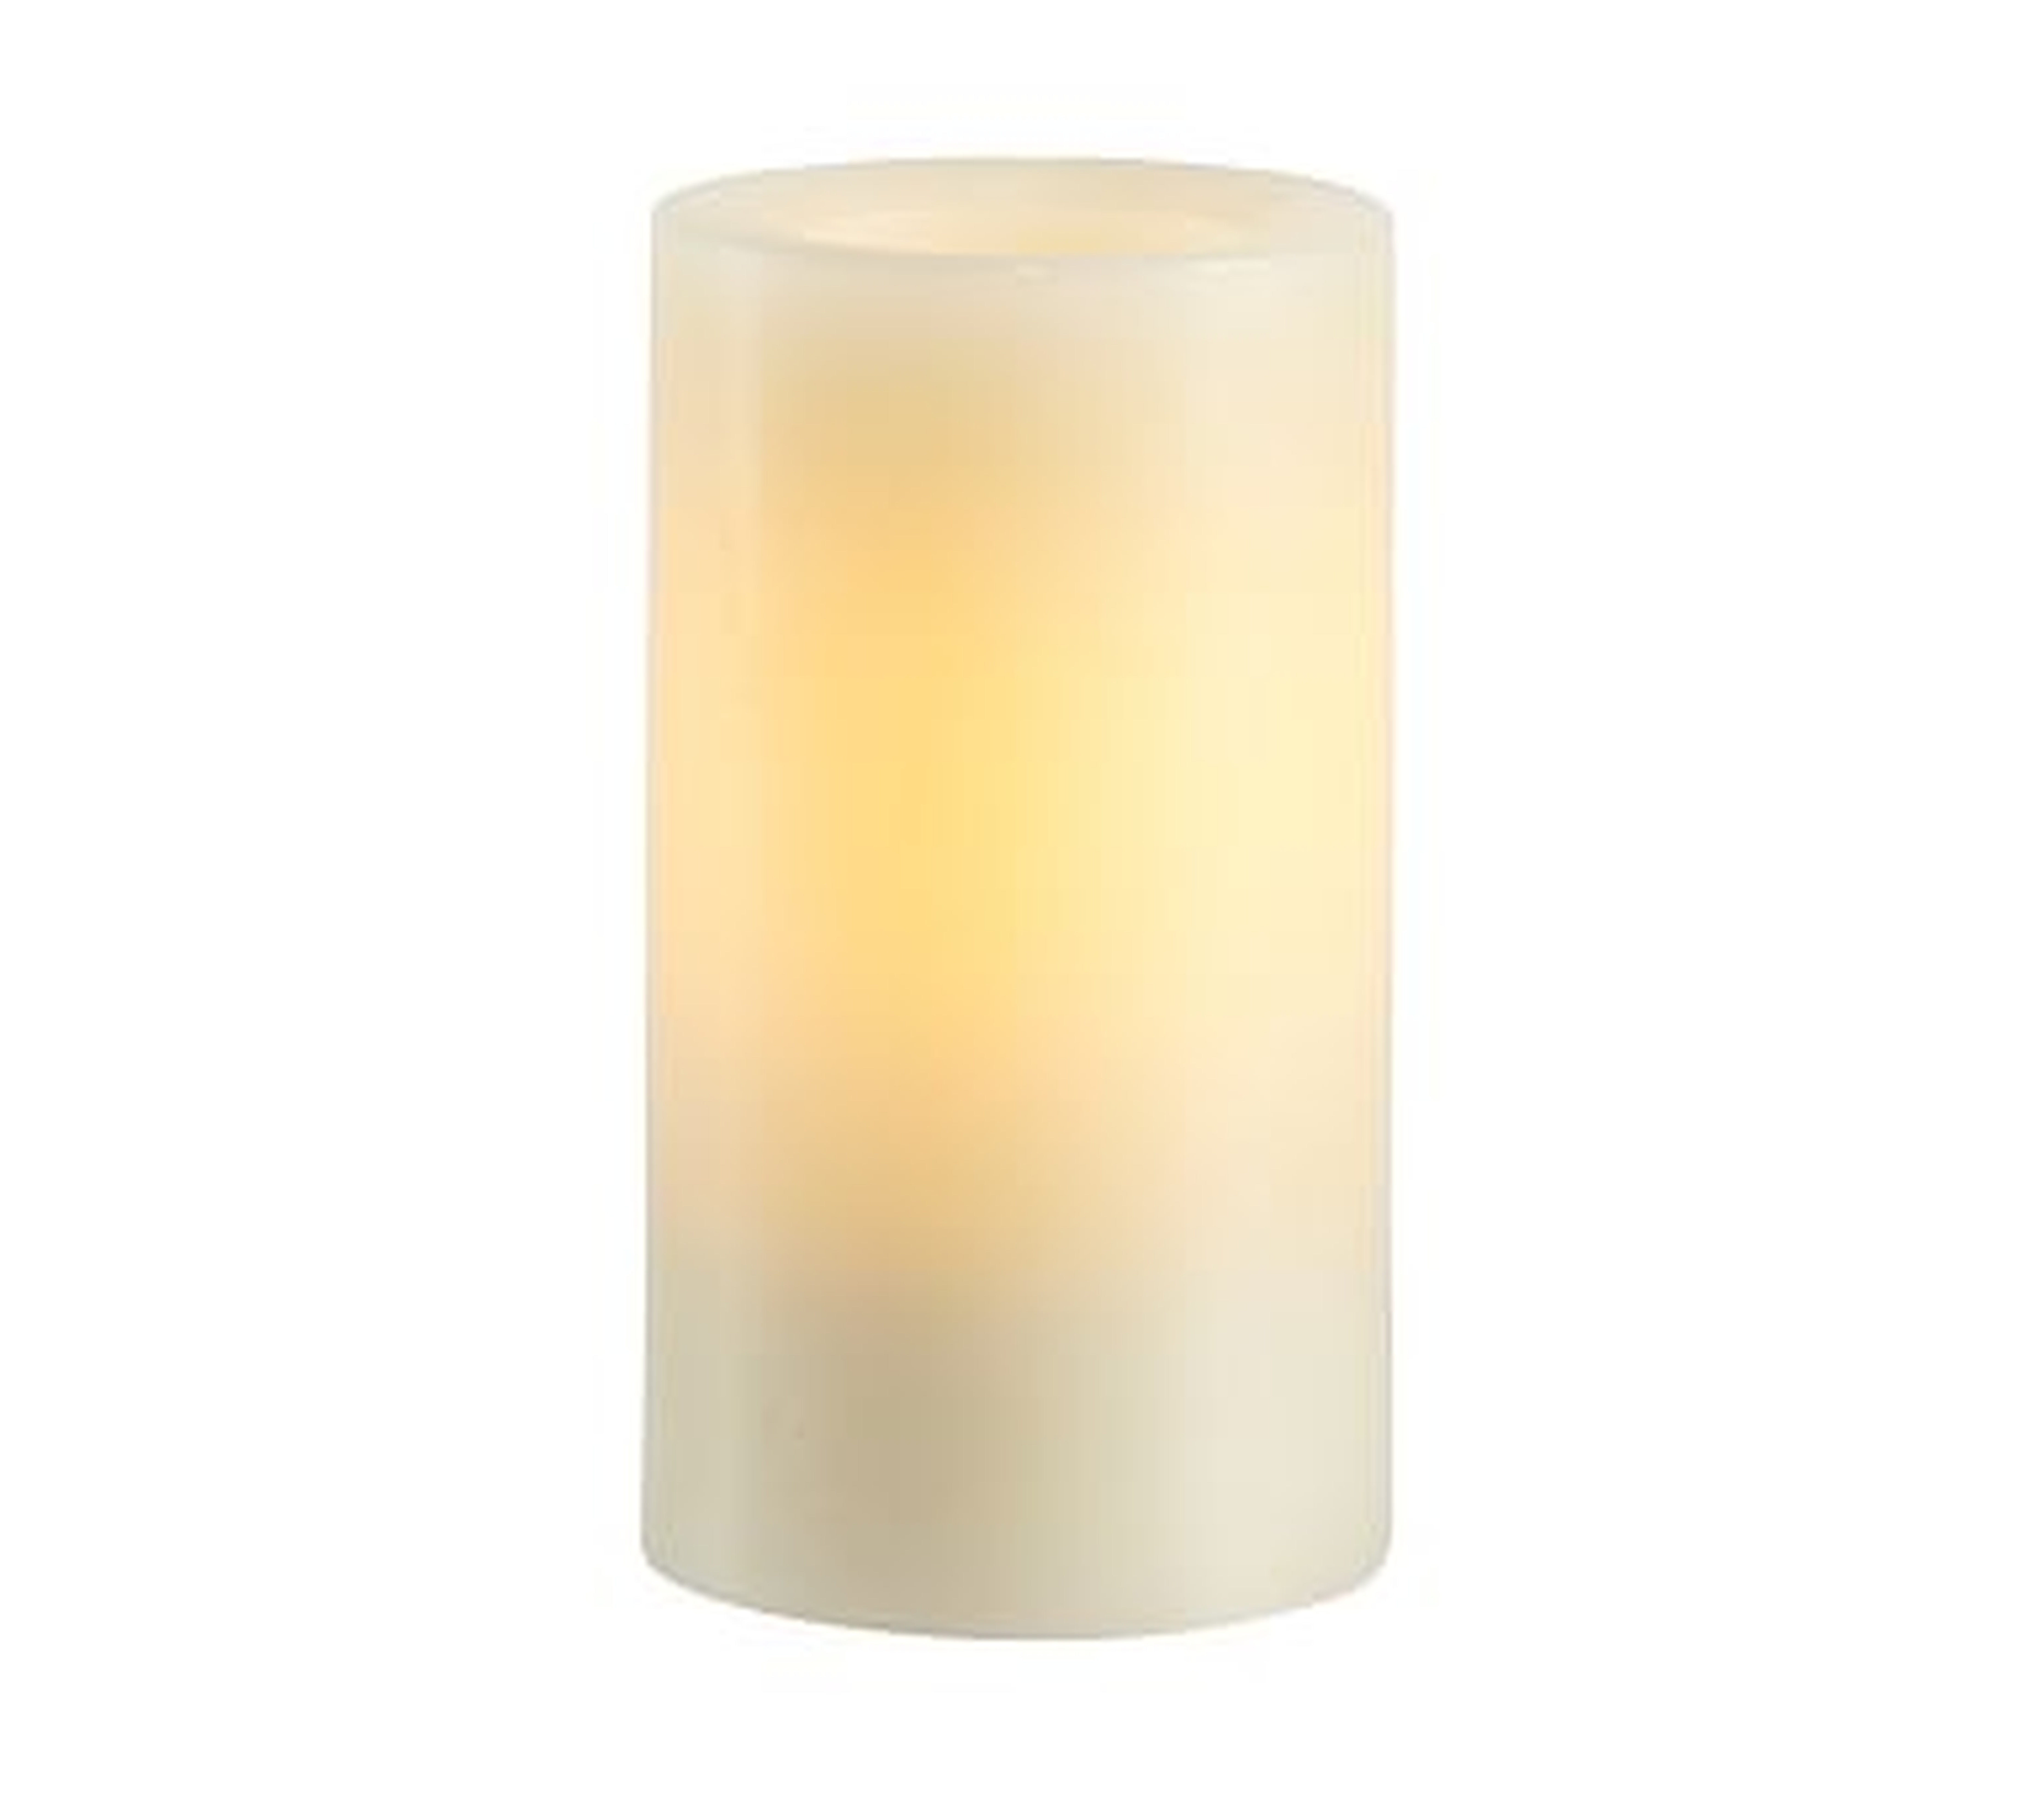 Standard Flameless Wax Candle, 3.25"x6" - Ivory - Pottery Barn